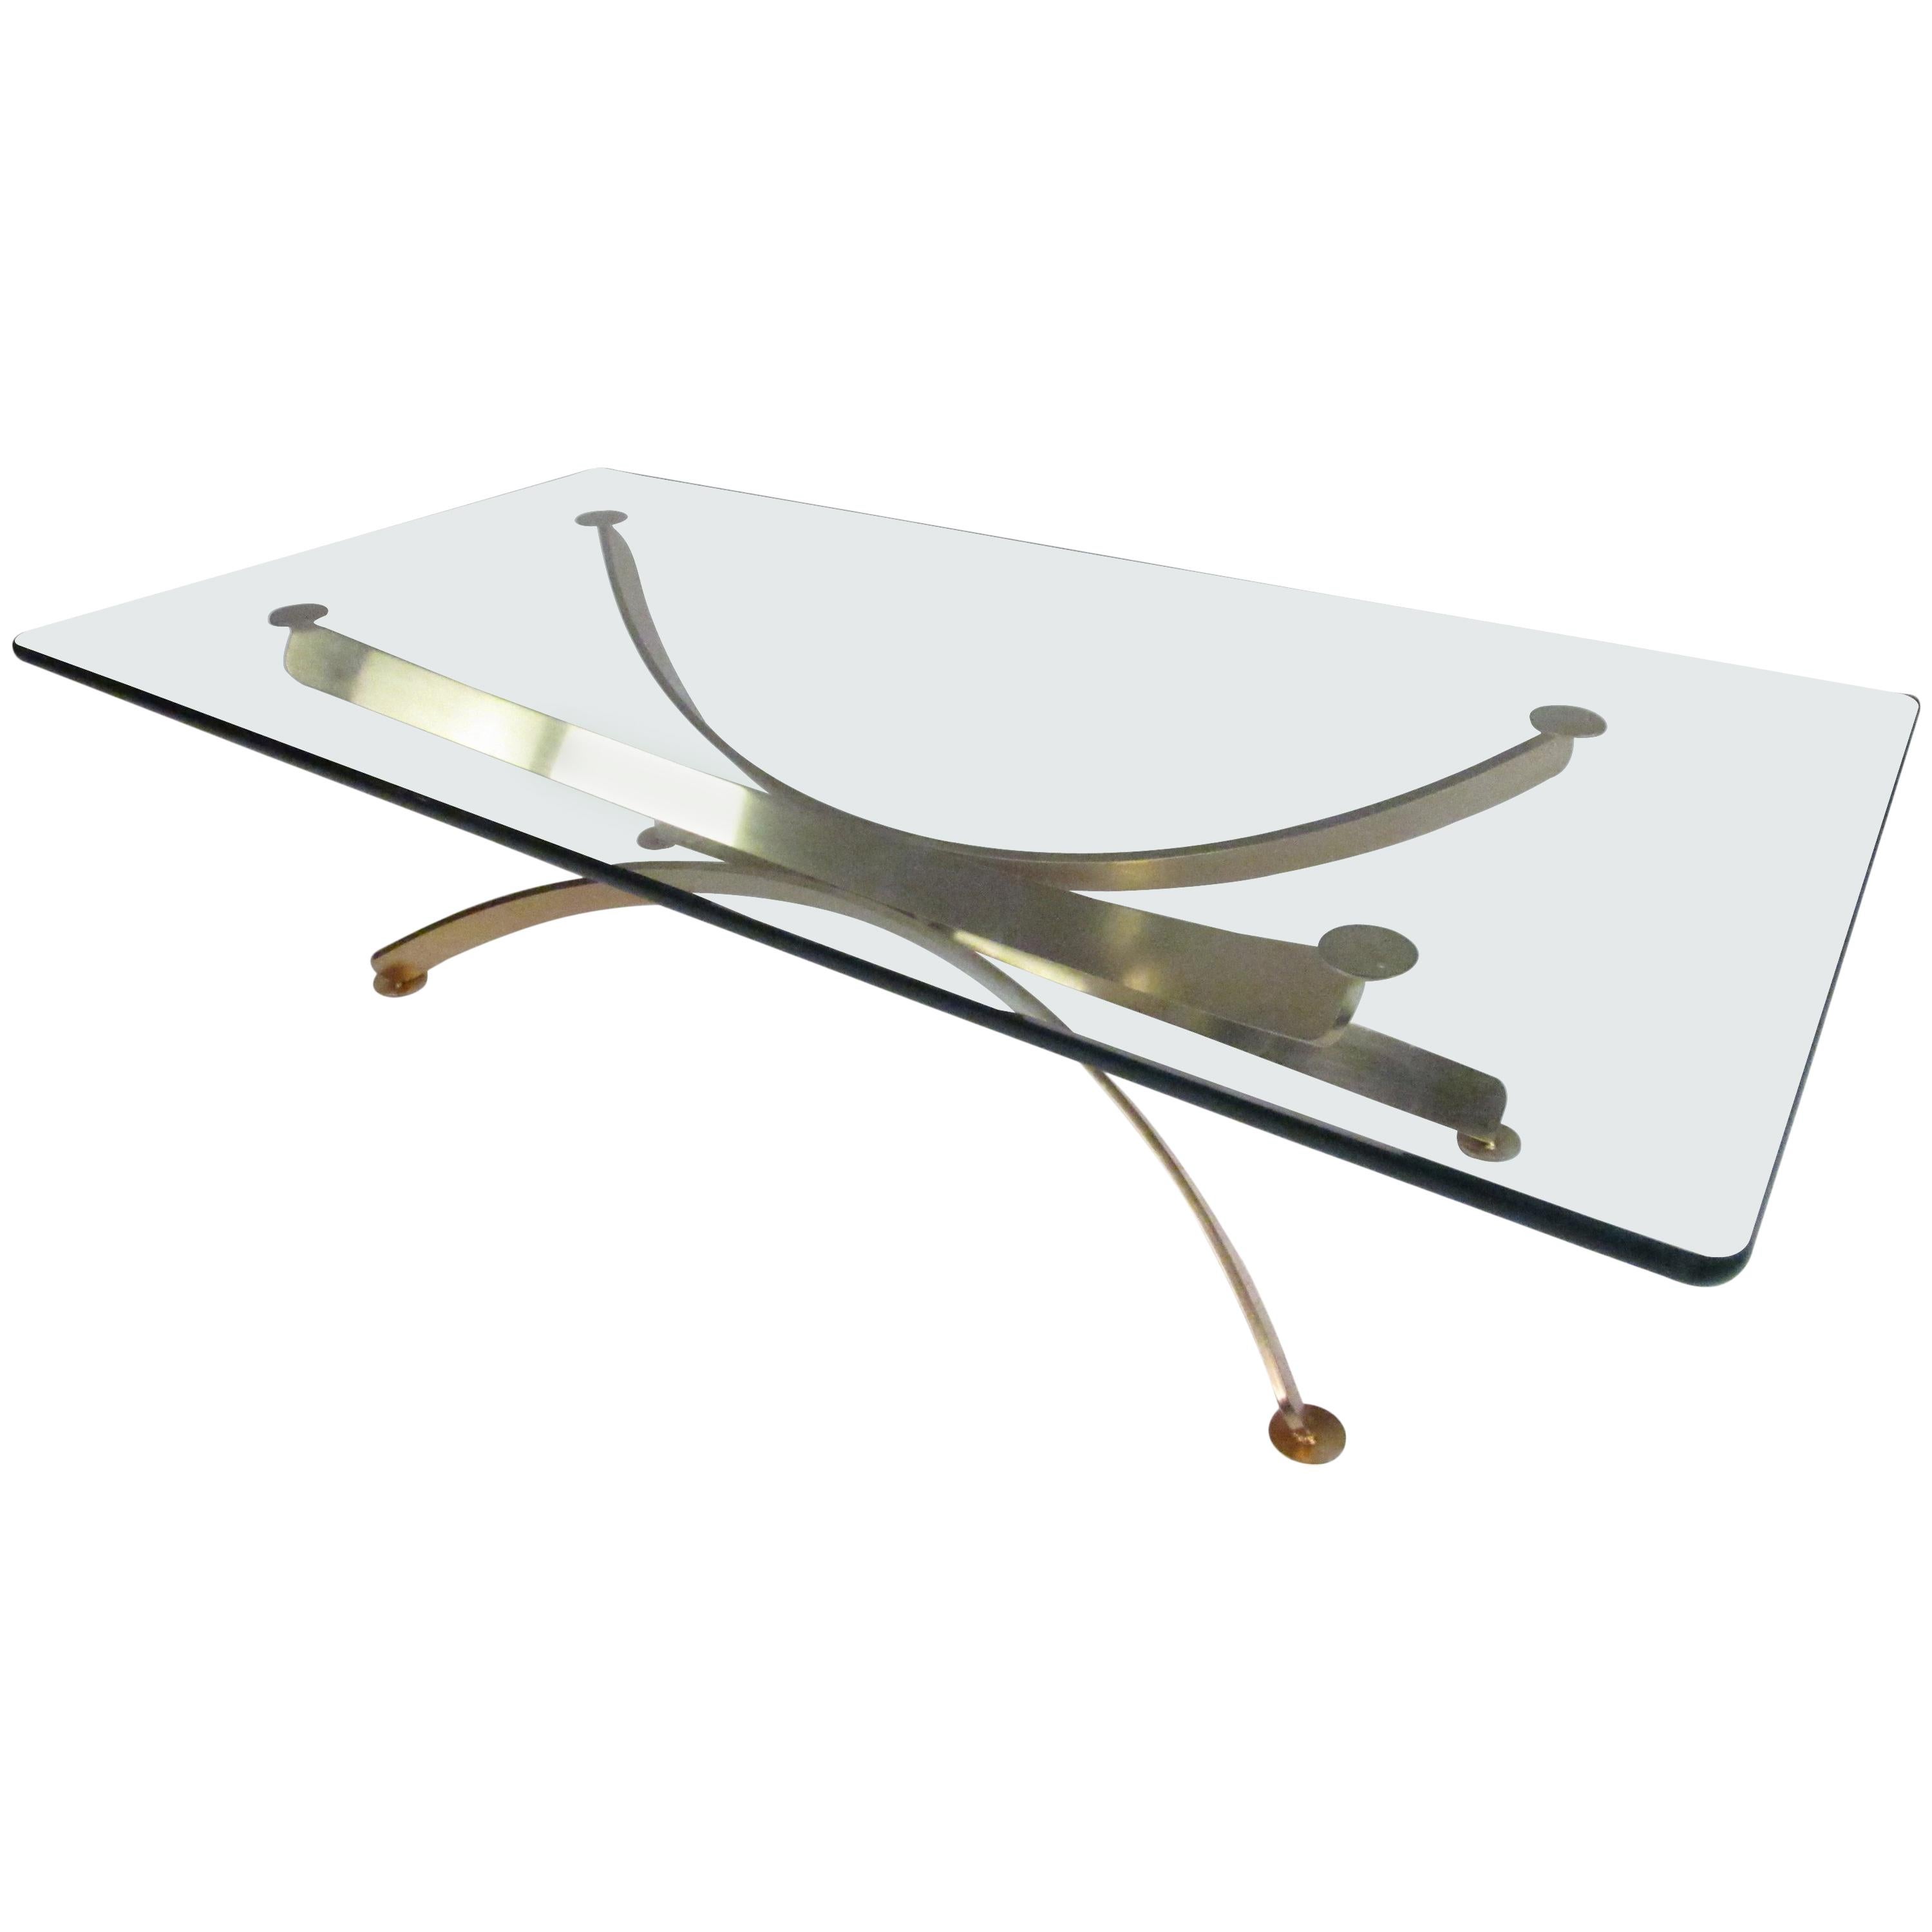 Beautiful Midcentury Roger Sprunger Style Brass Coffee Table